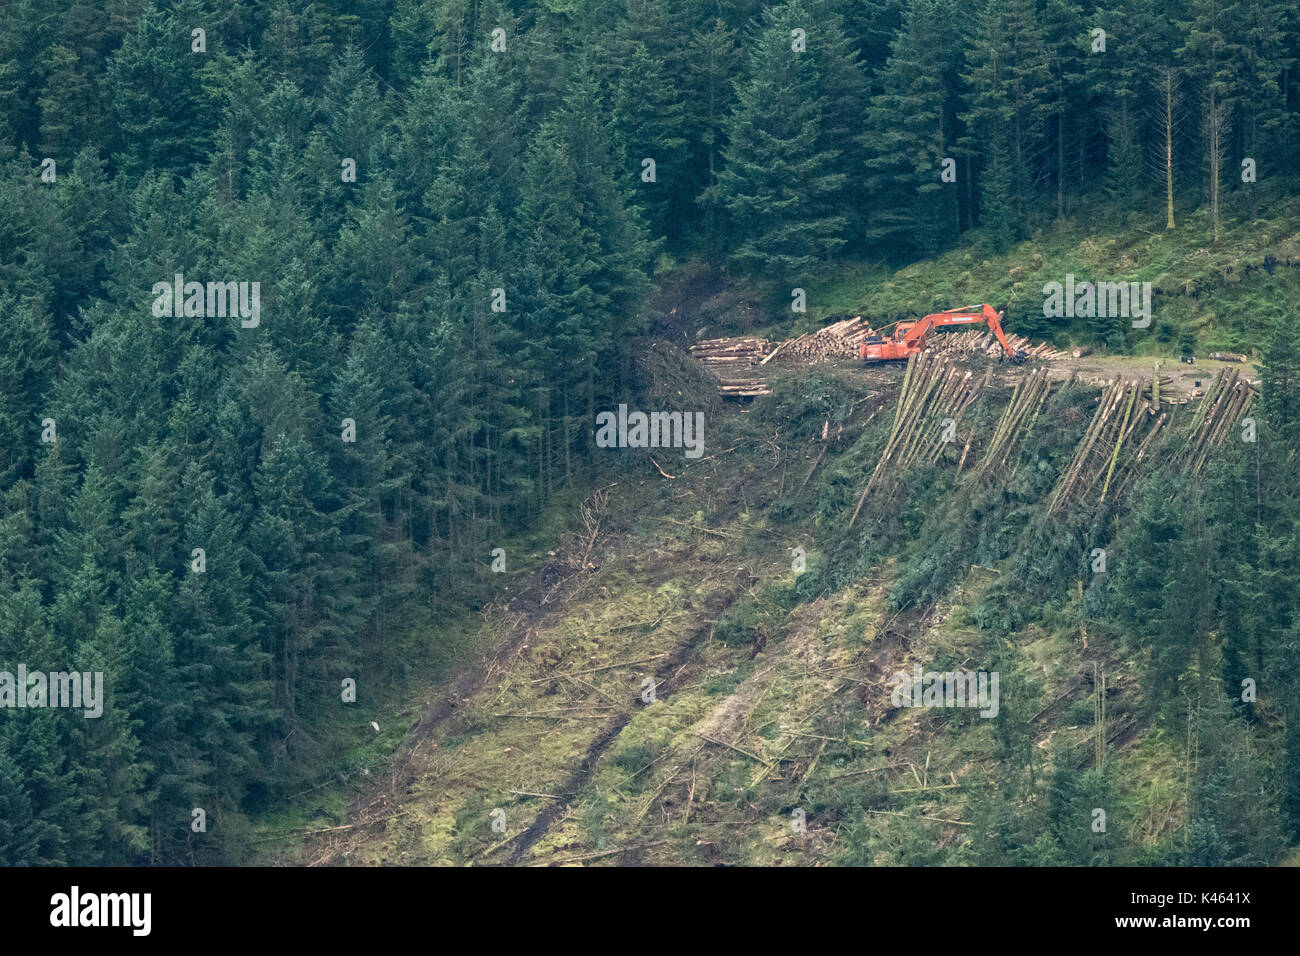 Tree-felling operations on Coillte managed forestry land in Wicklow uplands in Ireland Stock Photo